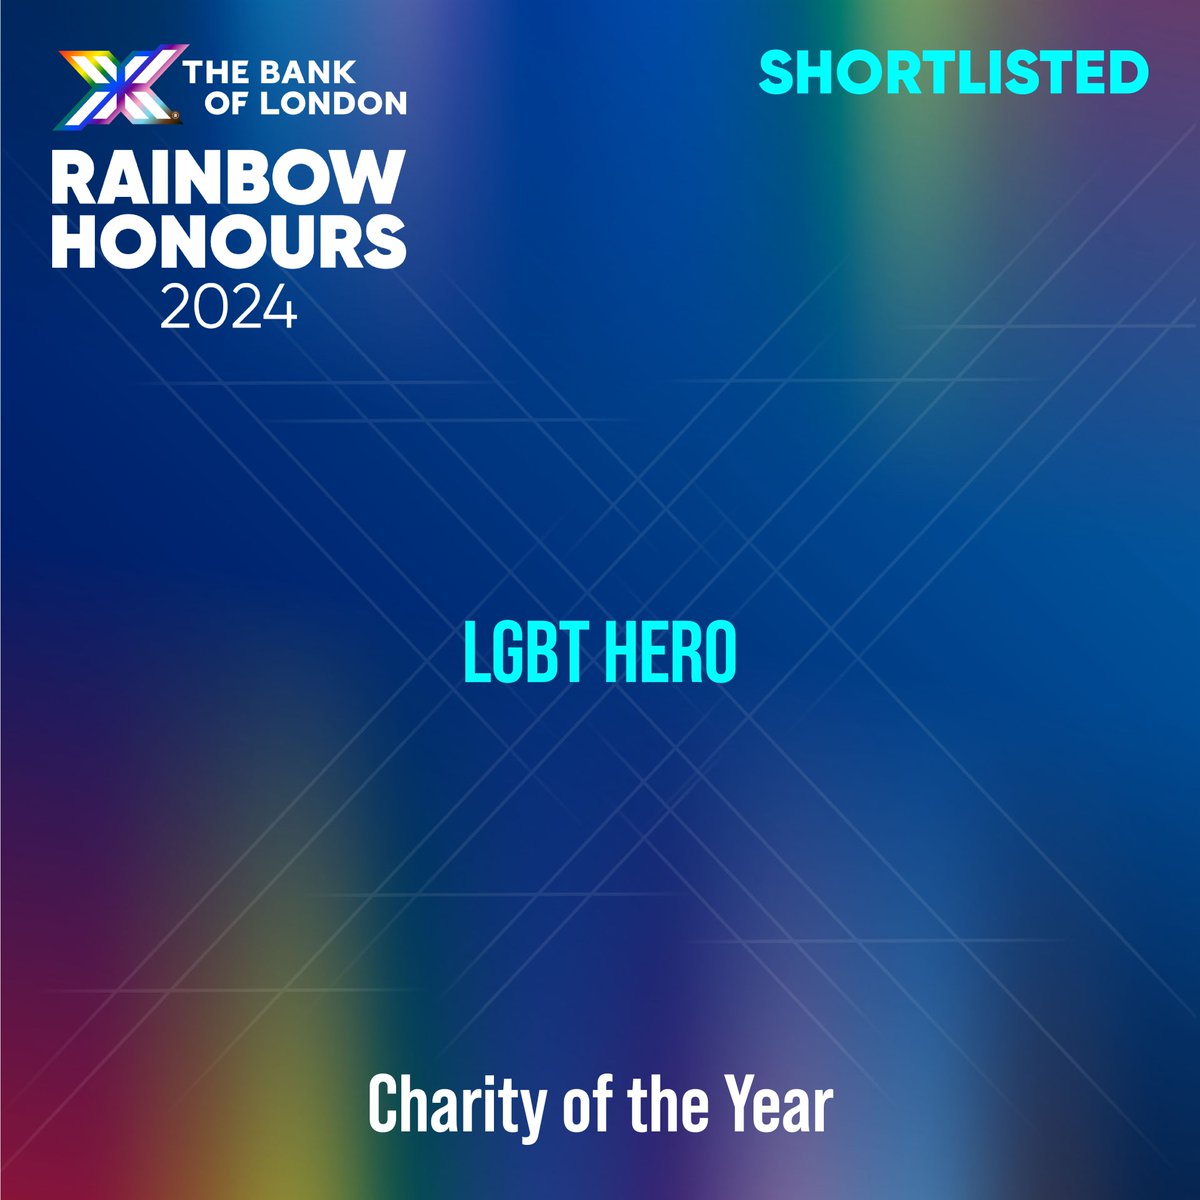 It's the last day to vote for @lgbthero as Charity of the Year at the @RainbowHonours. We'd really appreicate your vote and help recognise the fantastic work our small charity does in our community. VOTE: surveymonkey.com/r/TBOL2024